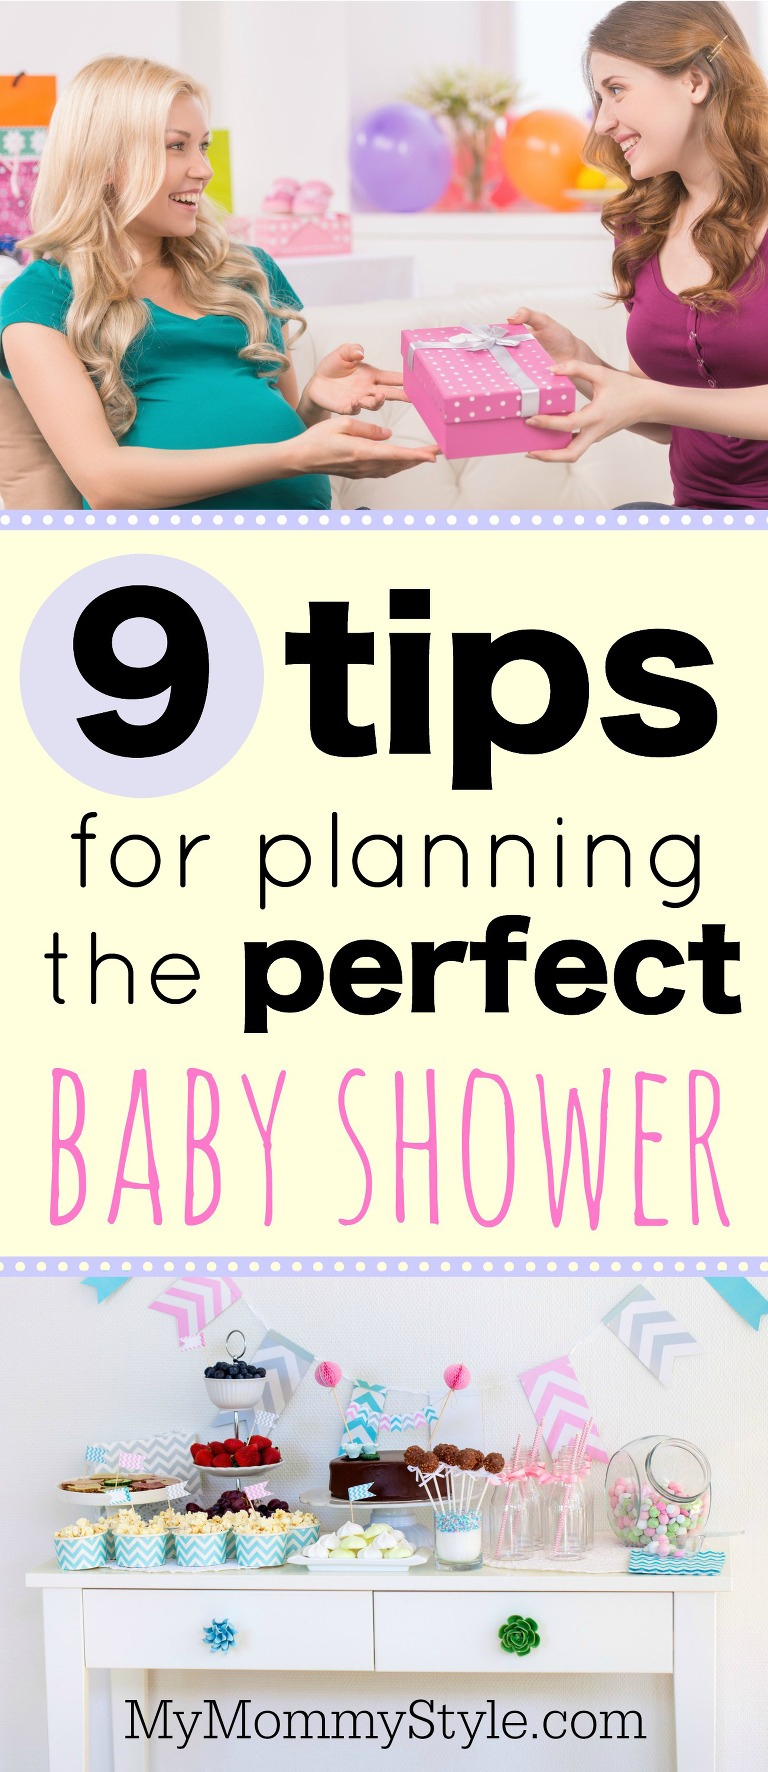 9 tips for planning the perfect baby shower